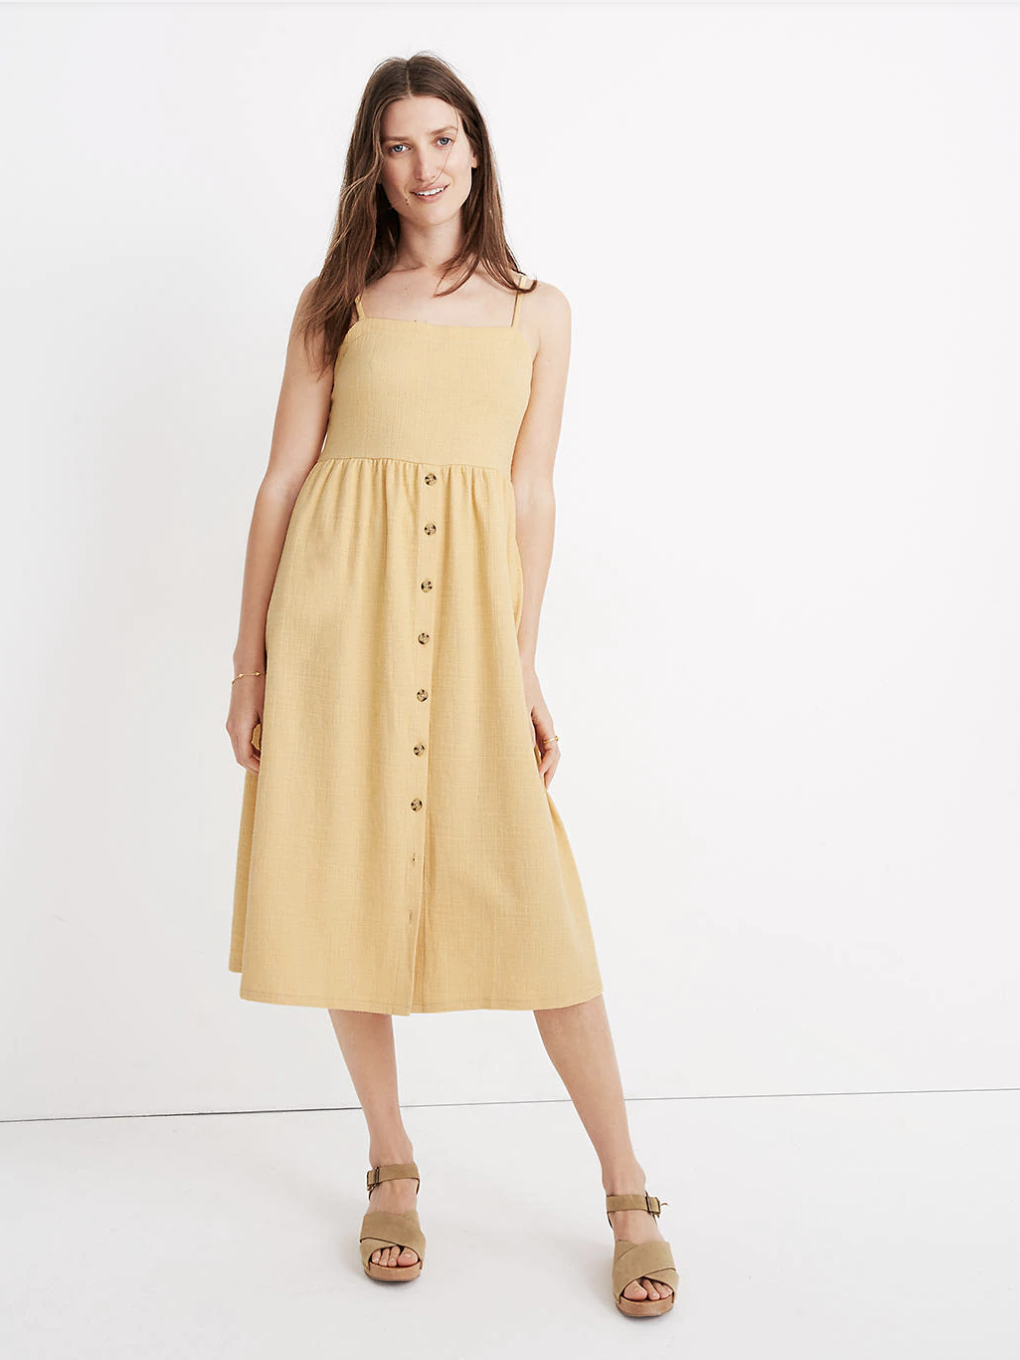 Madewell Yellow Dress Store, 55% OFF ...